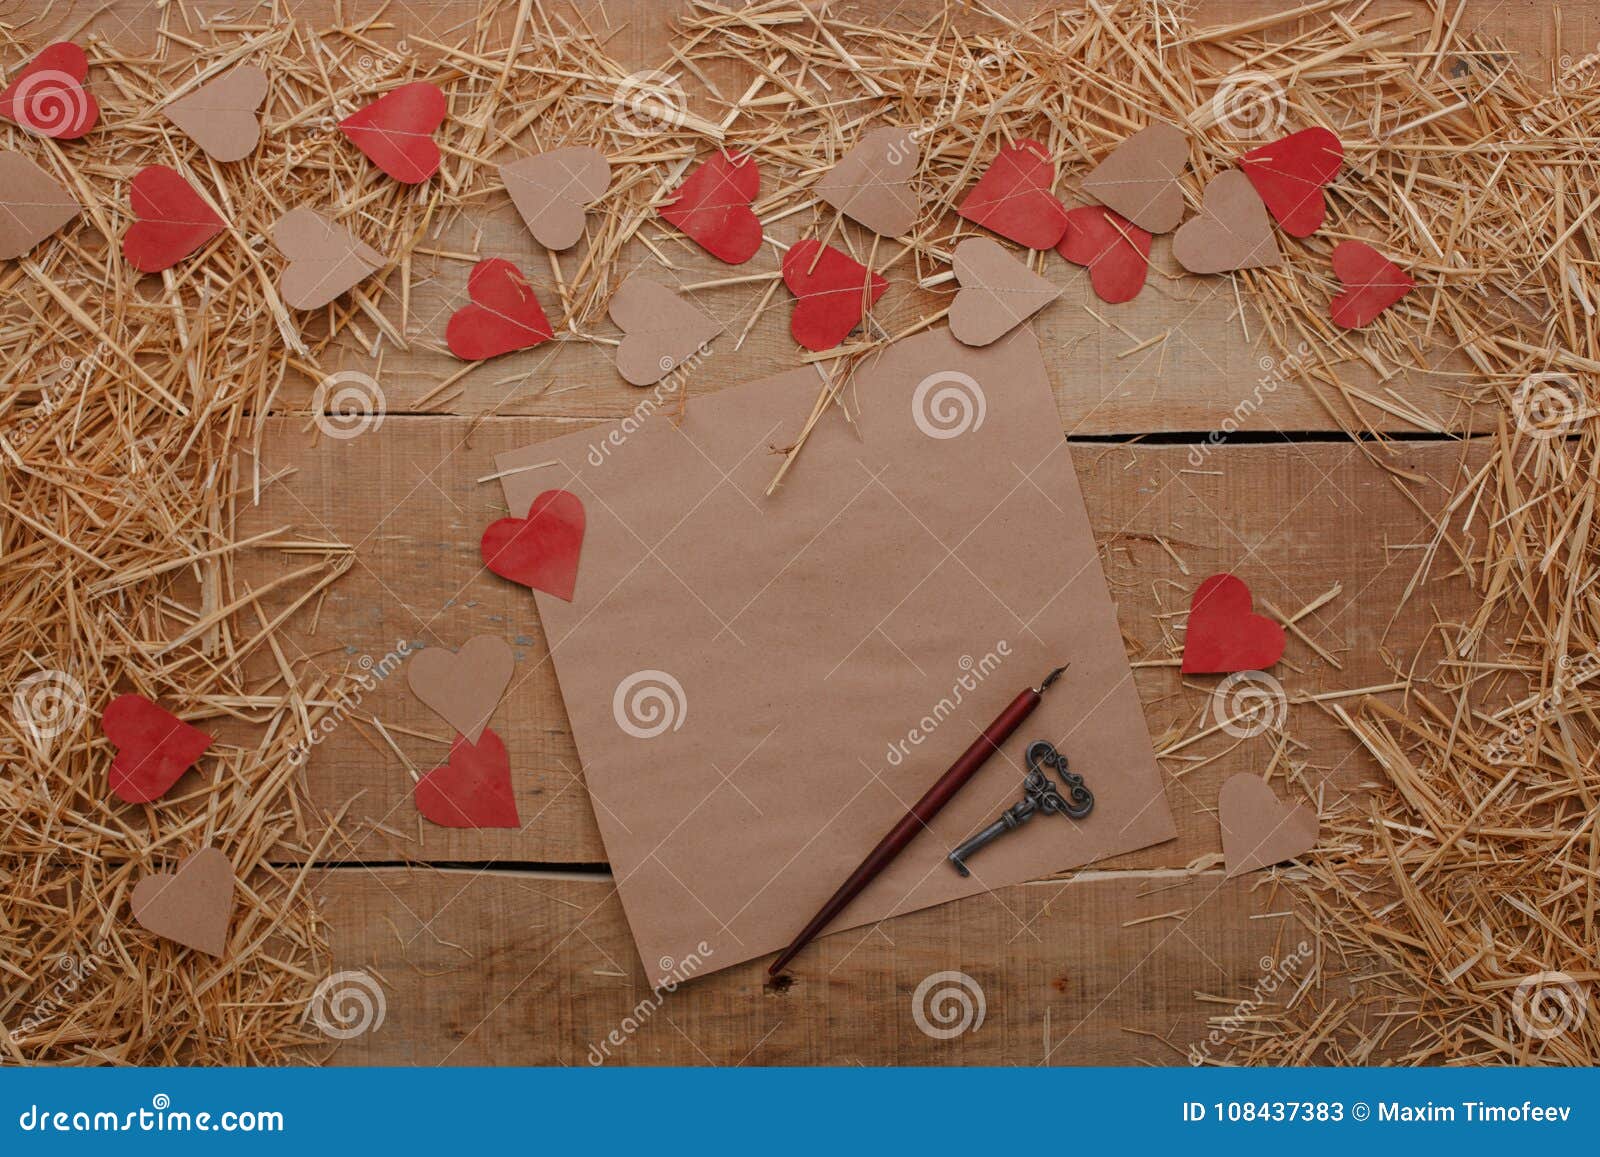 Happy Valentines Day Love Celebration in a Rustic Style . Stock Image ...